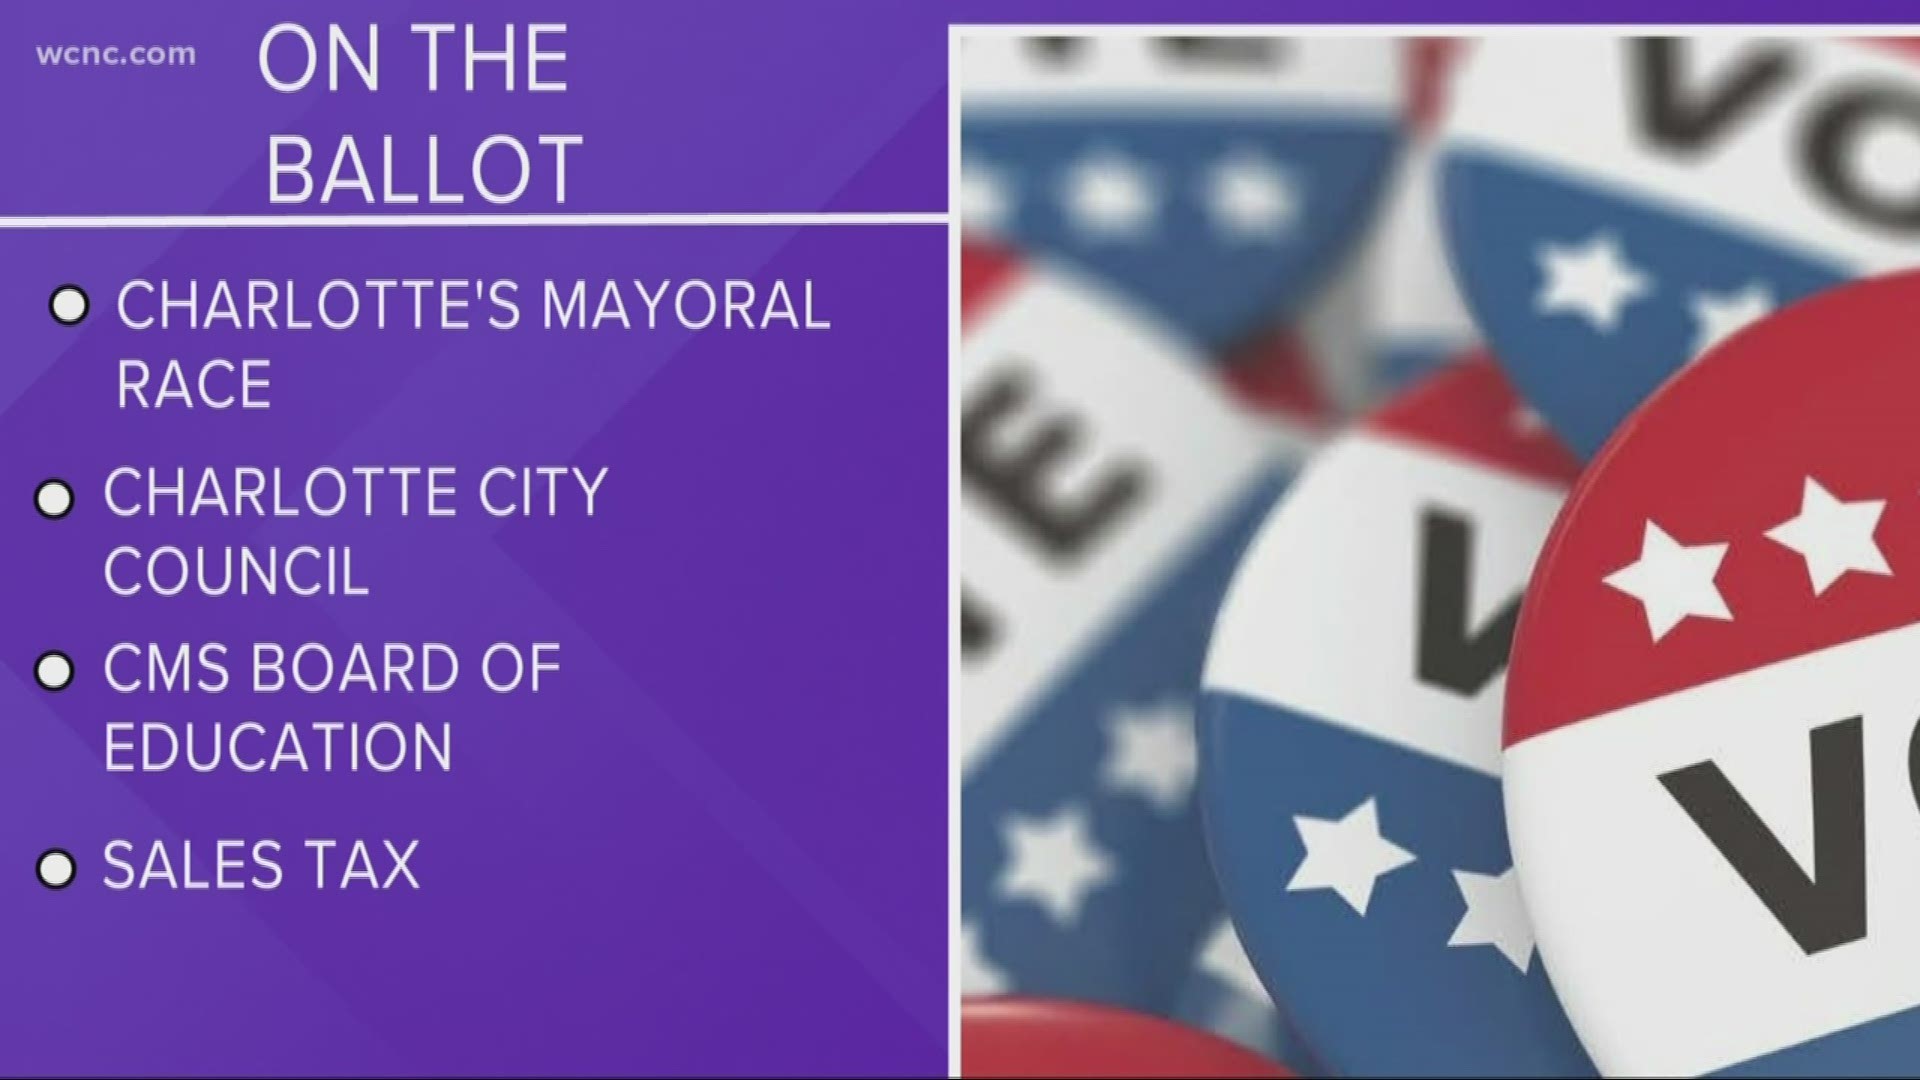 On the ballot in Charlotte: the mayor's race, open positions in Charlotte's City Council, the CMS Board of Education and the controversial sales tax increase.